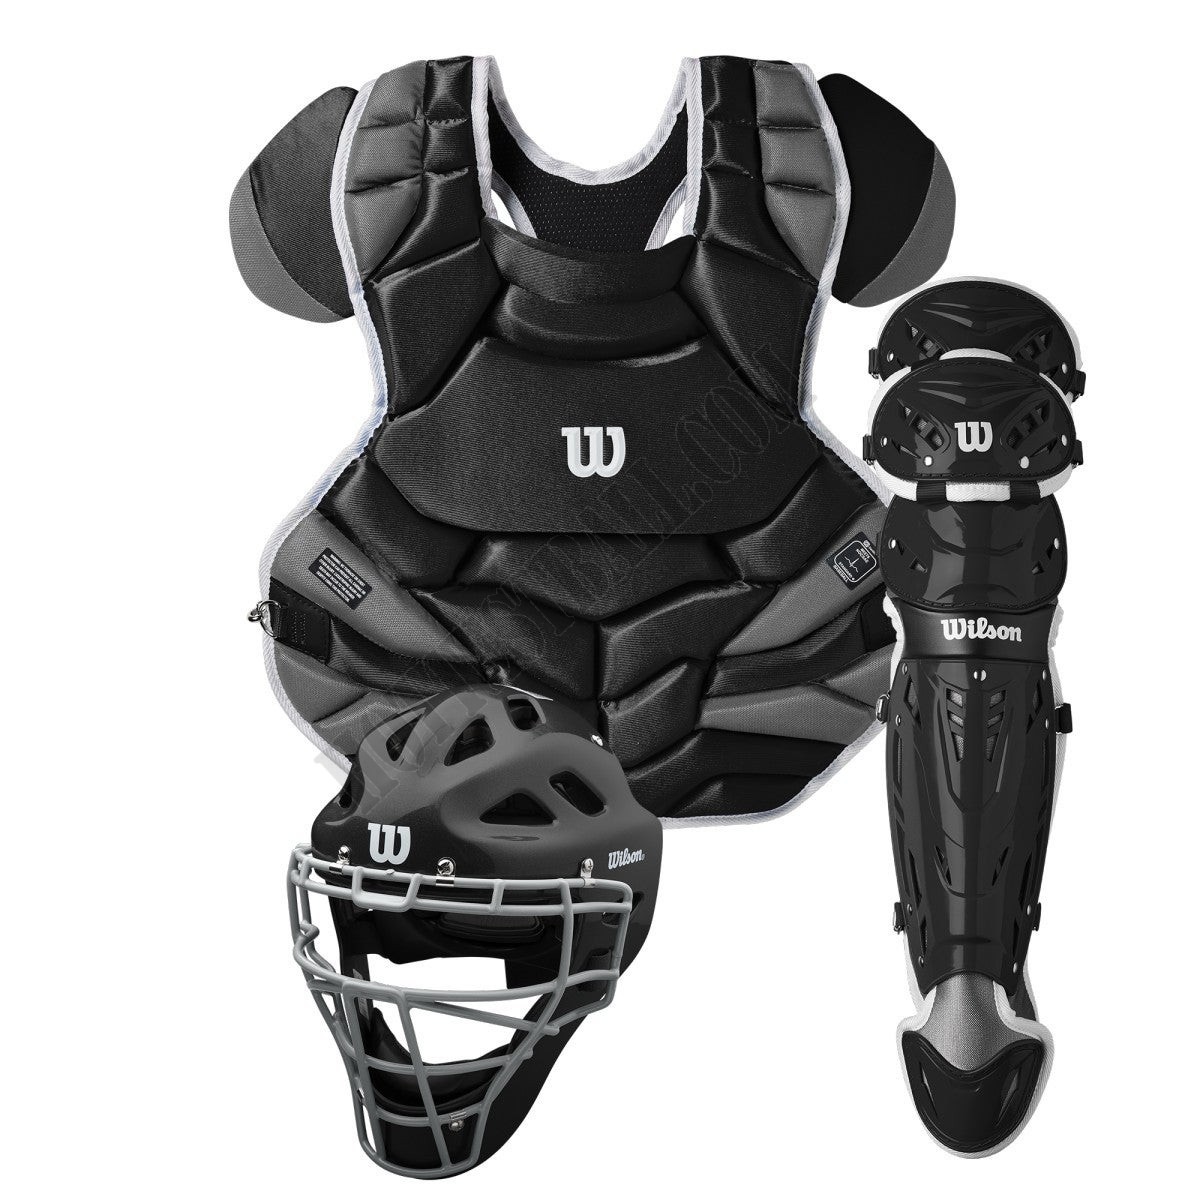 Wilson C1K Catcher's Gear Kit with NOCSAE Approved Chest Protector - Adult - Wilson Discount Store - Wilson C1K Catcher's Gear Kit with NOCSAE Approved Chest Protector - Adult - Wilson Discount Store